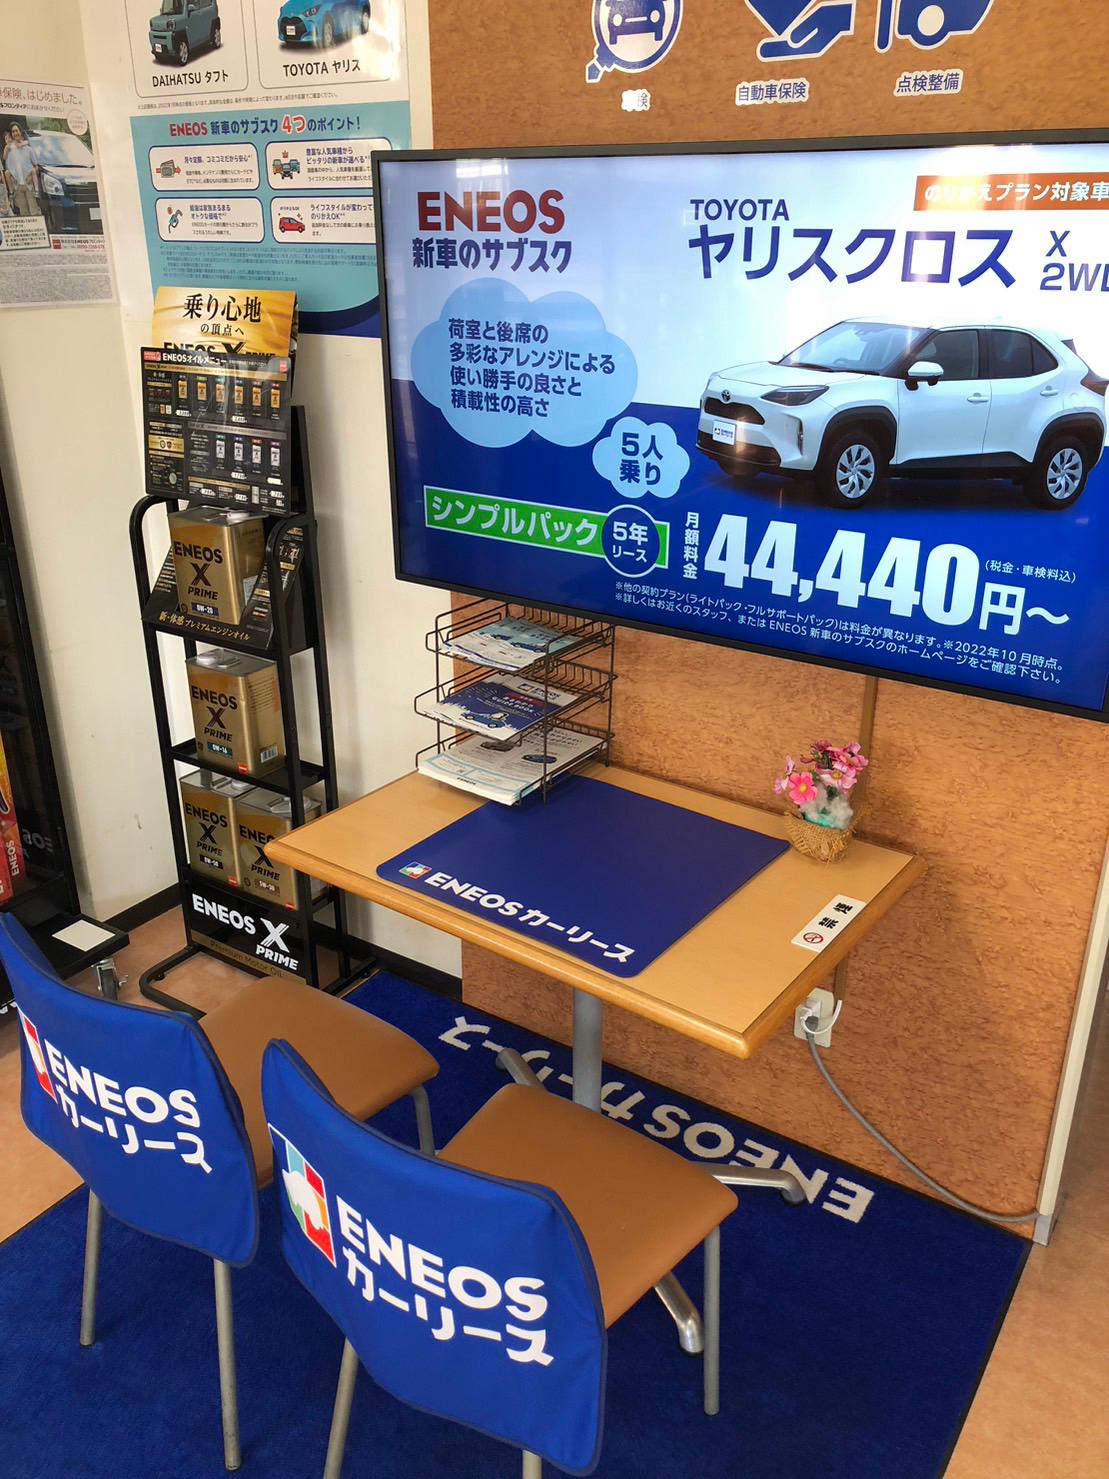 Images ENEOS Dr.Driveセルフ湖南店(ENEOSフロンティア)